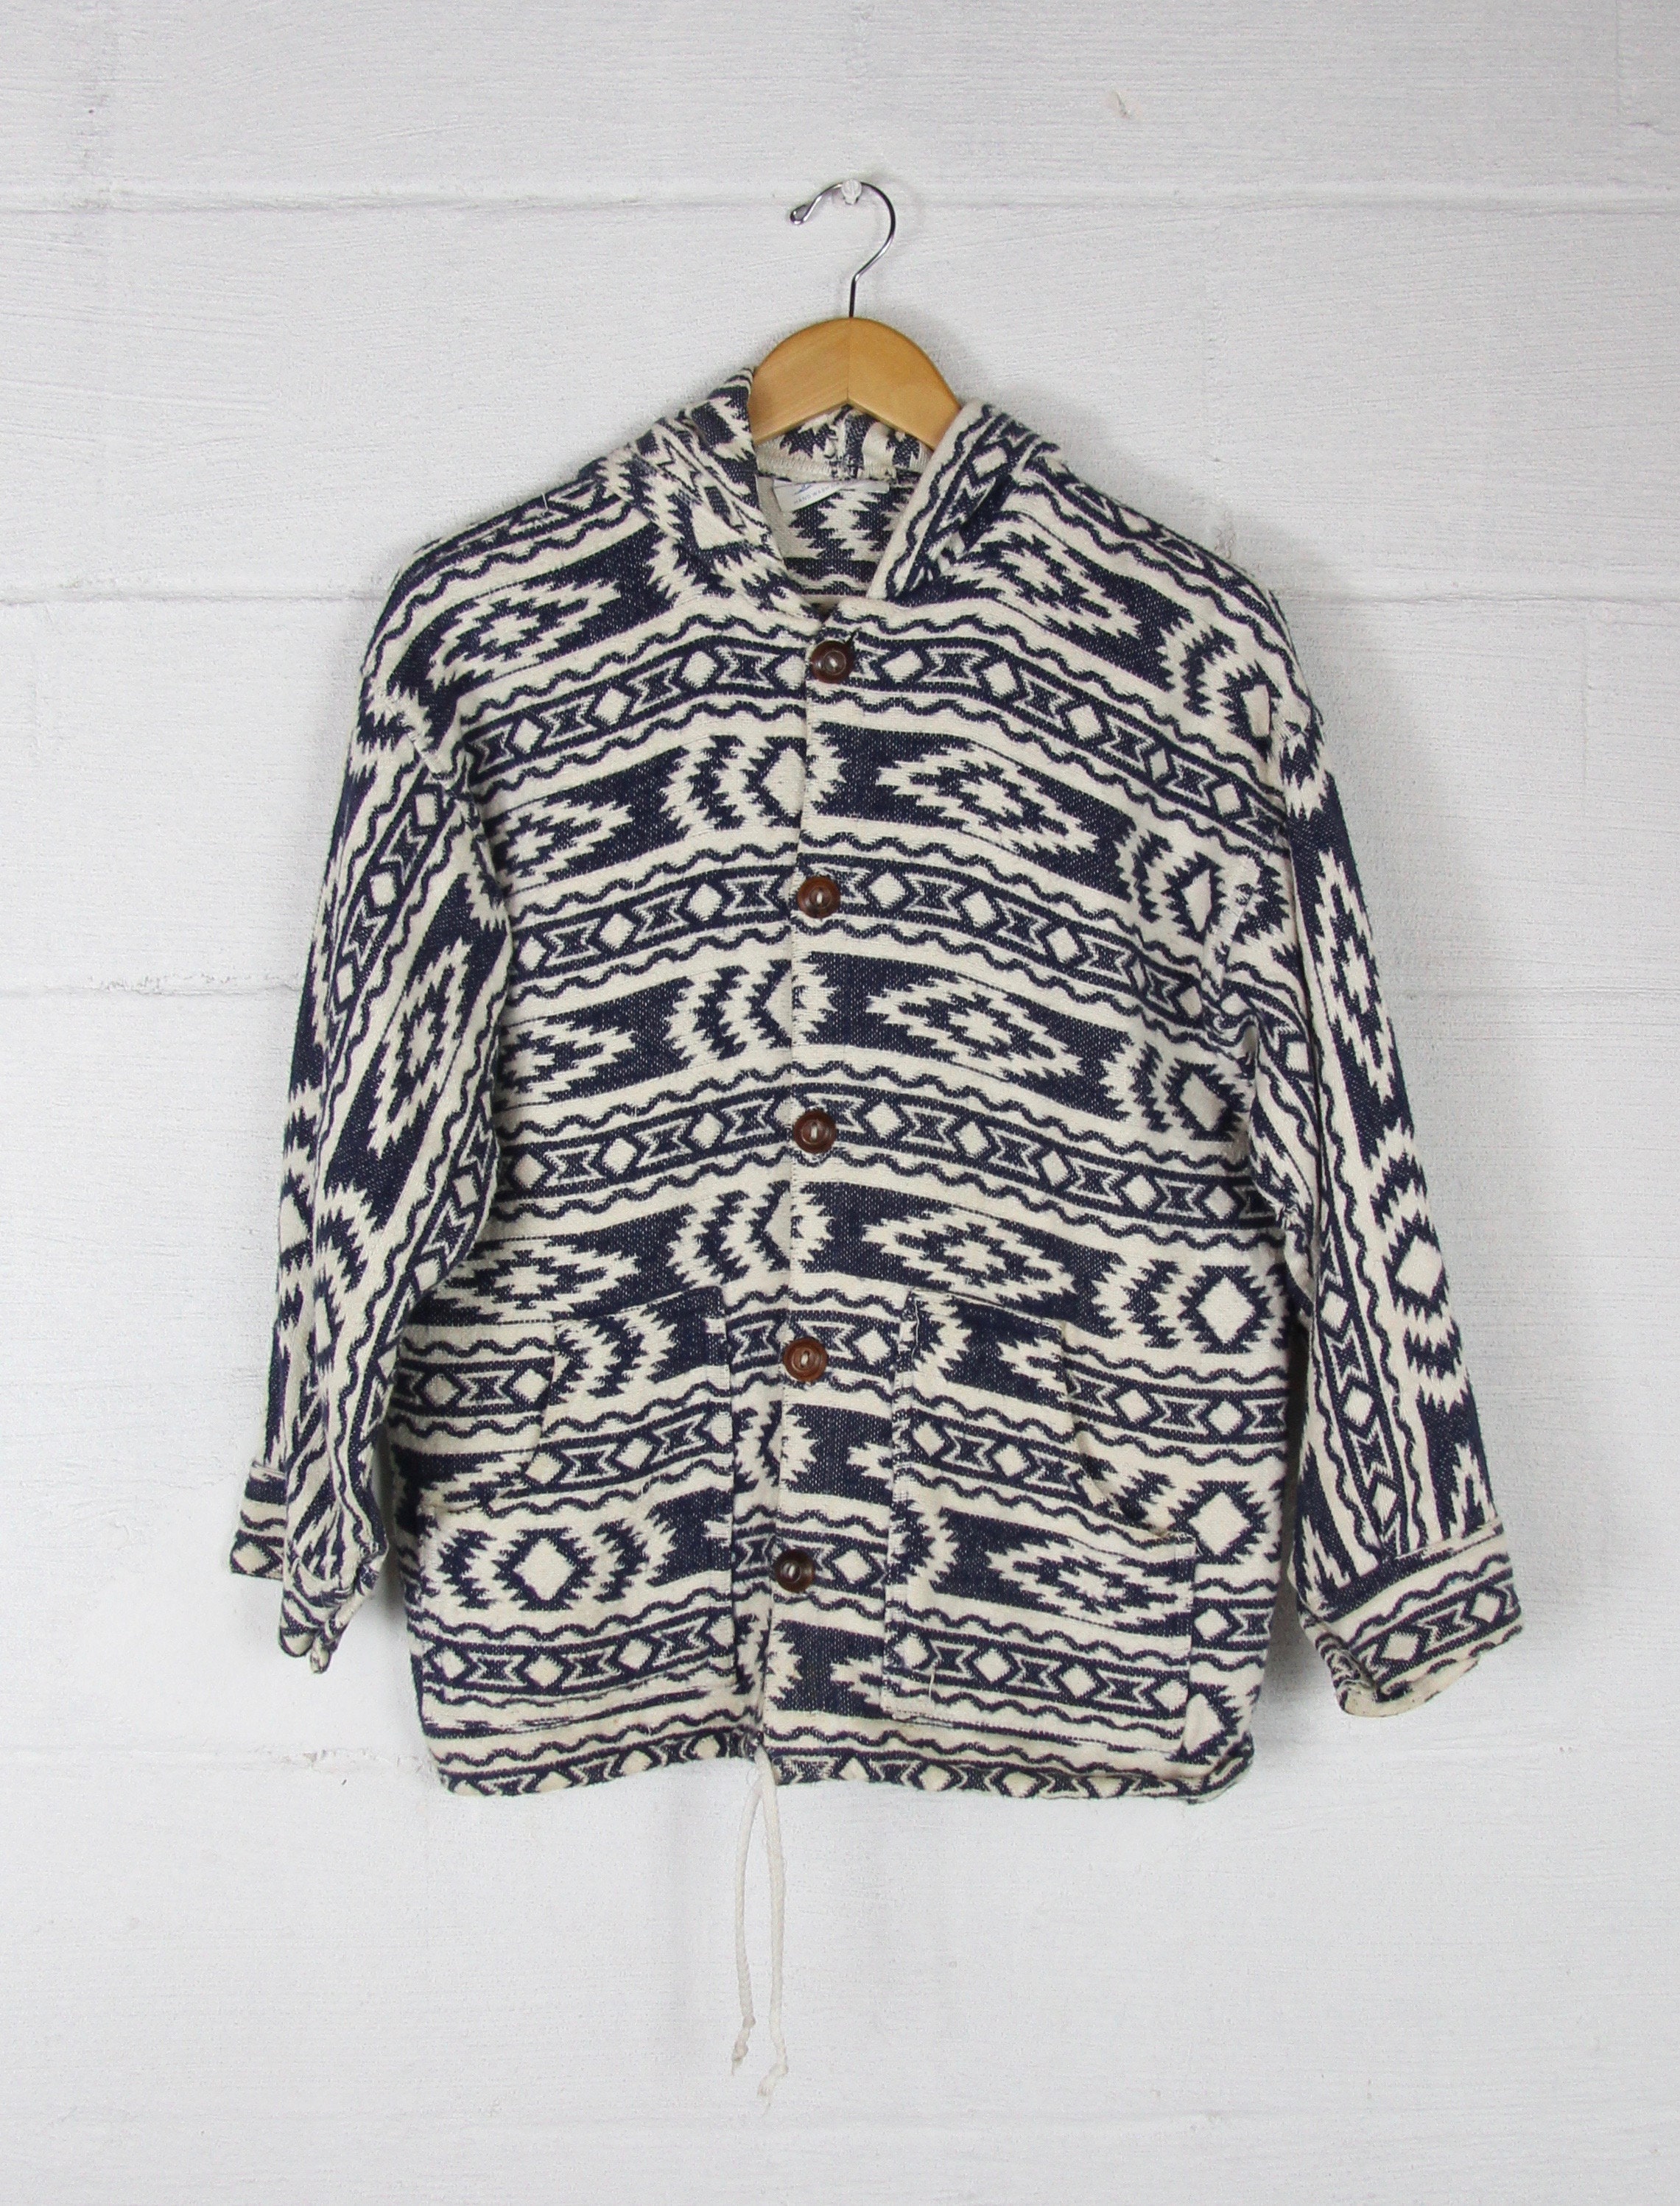 Patterned Hoodie Button Down Navy and White Vintage Western Navajo ...